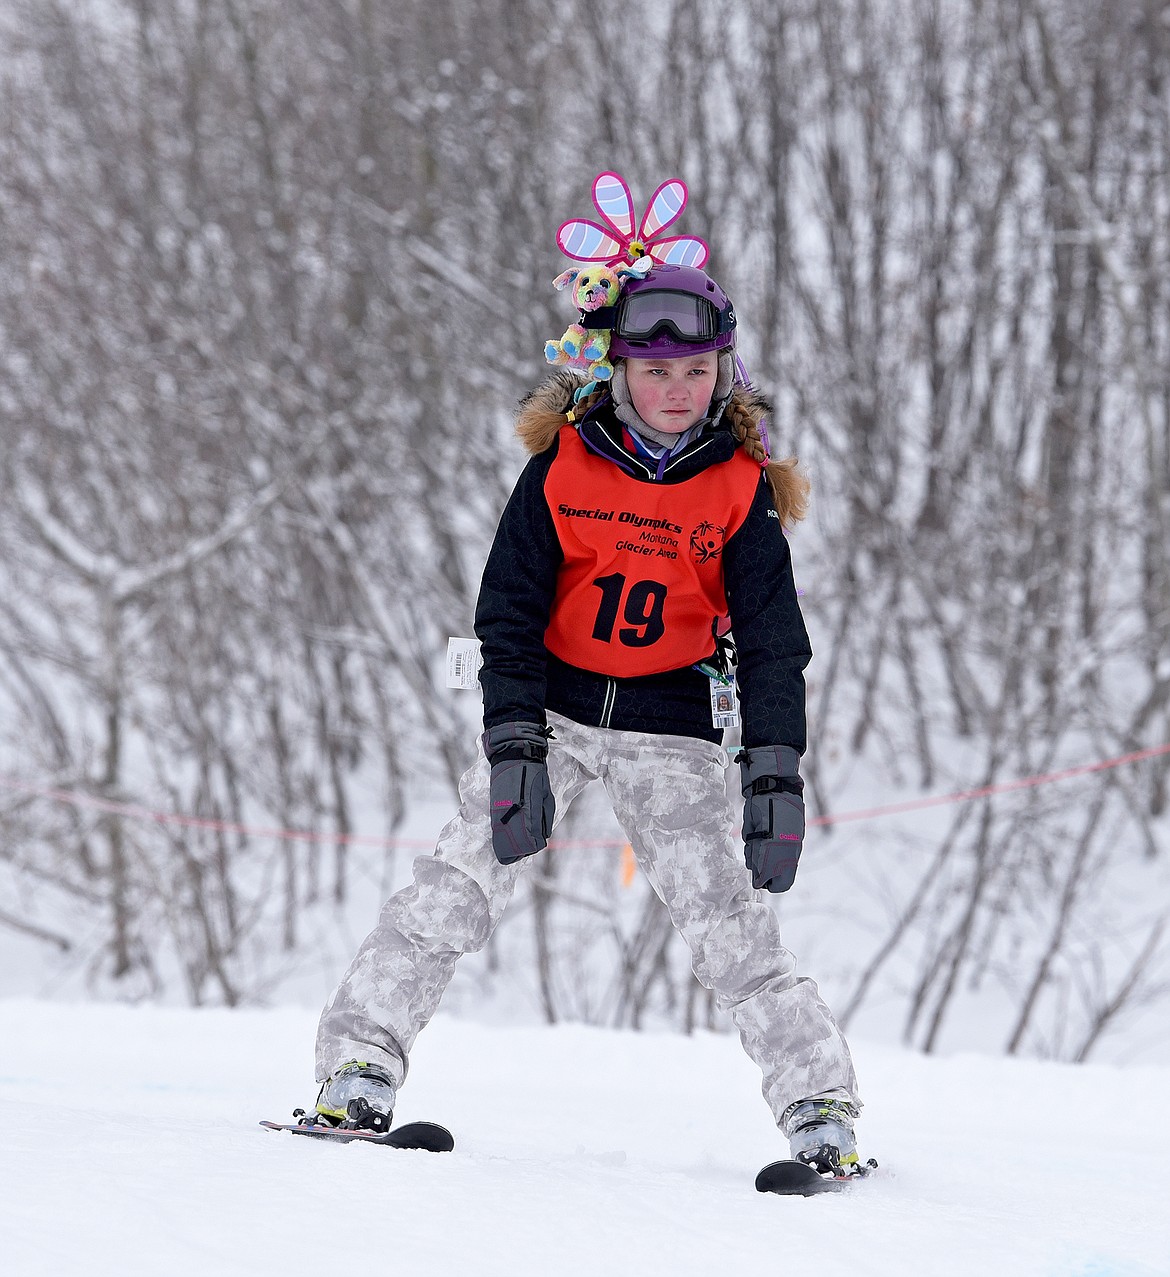 A competitor focuses on the finish line while racing the Alpine Giant Slalom course at the Special Olympics Montana Winter Games at Whitefish Mountain Resort on Wednesday, March 1. (Whitney England/Whitefish Pilot)